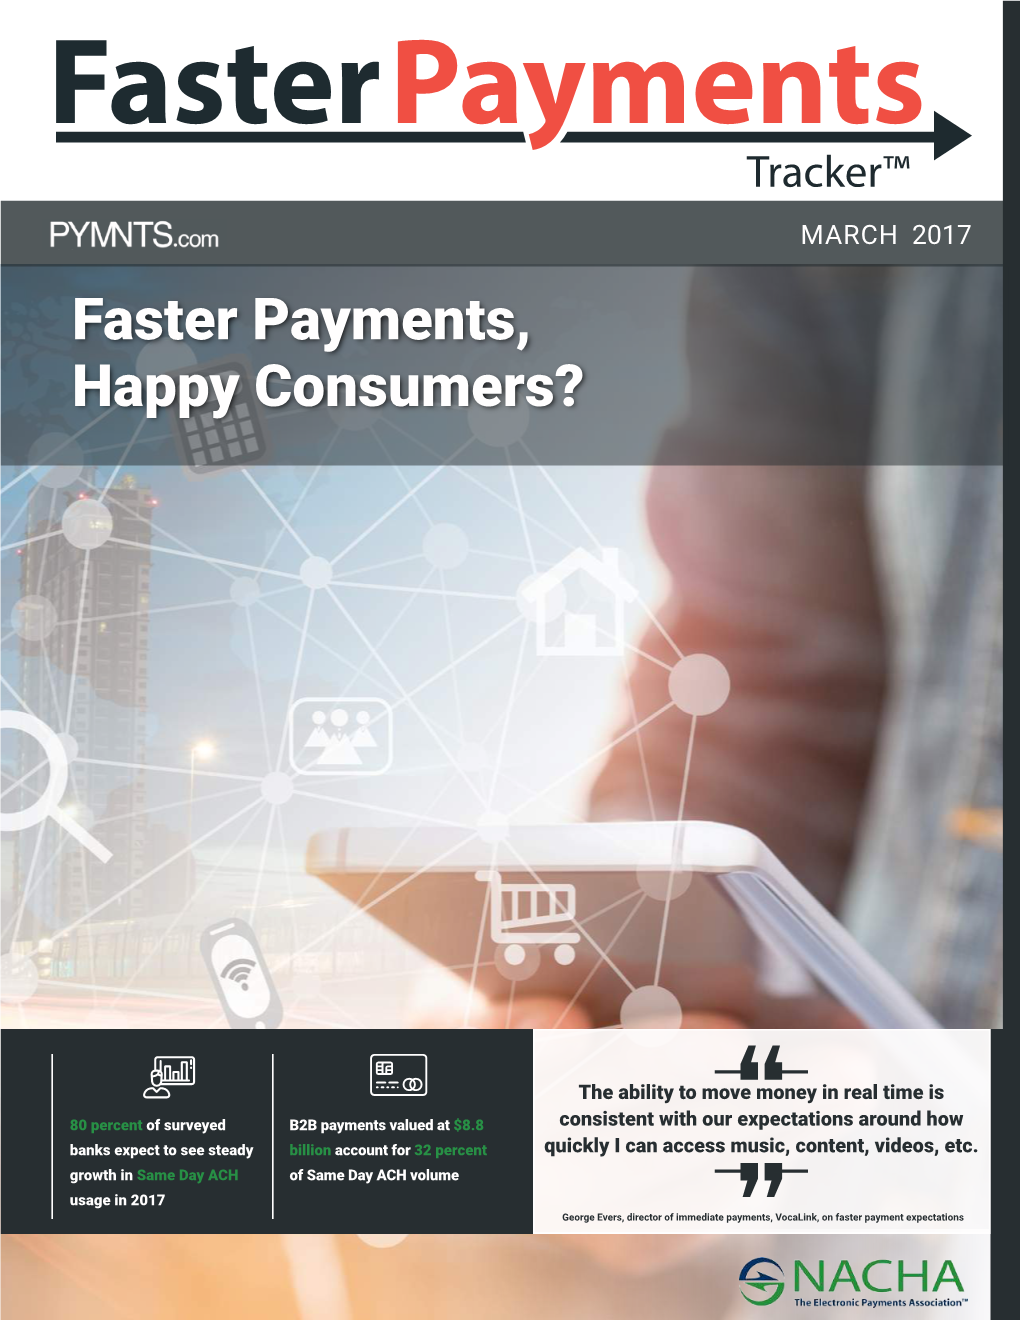 Faster Payments, Happy Consumers?